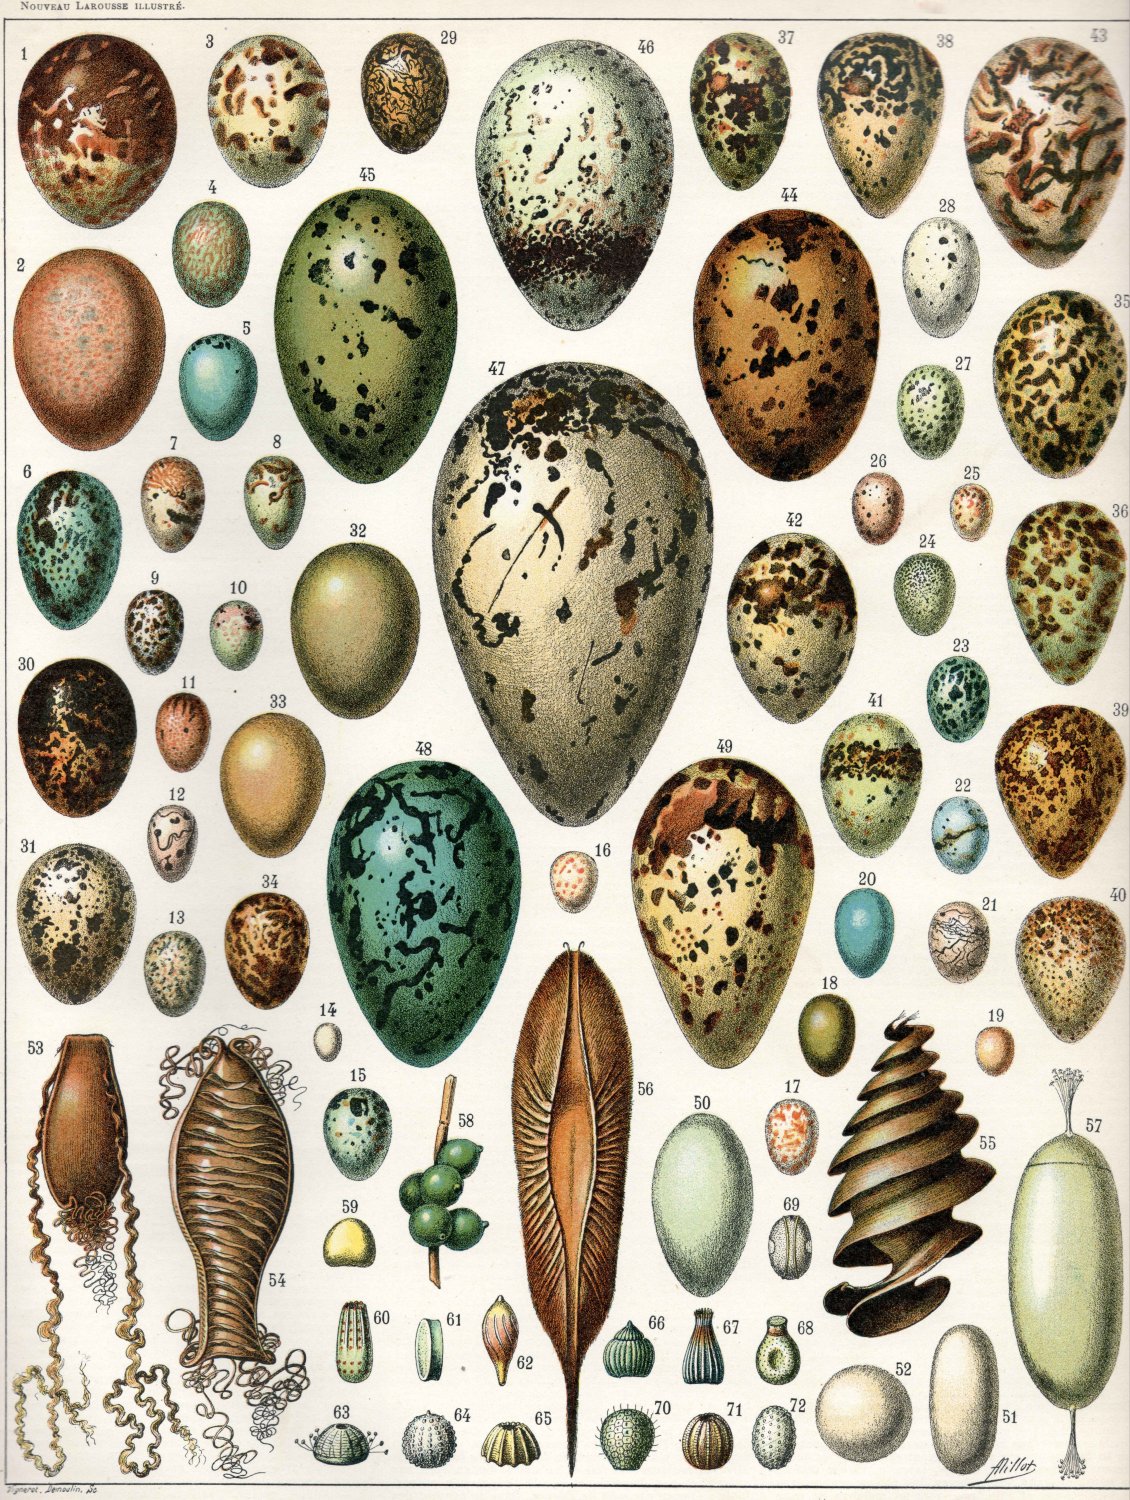 Different Types of Eggs Chart 13"x19" (32cm/49cm) Polyester Fabric Poster